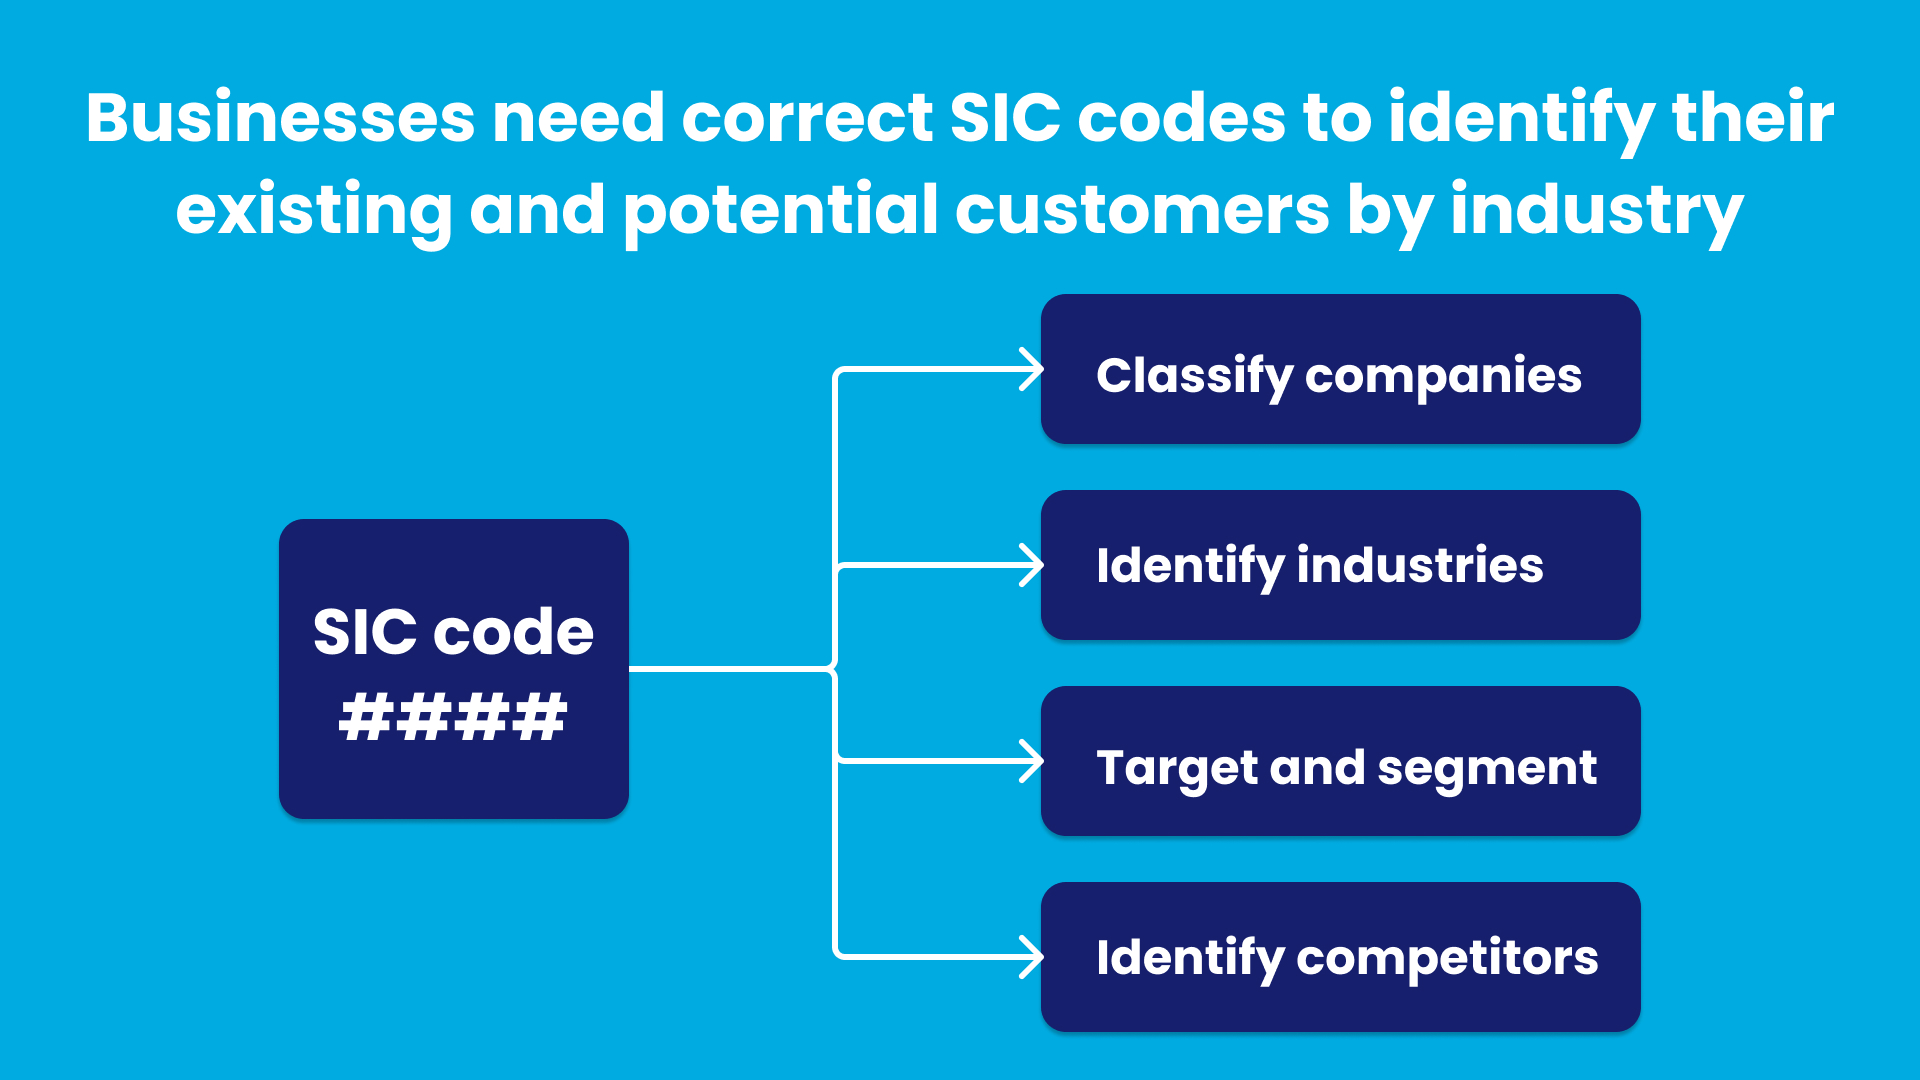 A correct SIC code will enable users to find industry-based clients in their database as well as discover new clients in targeted industries and identify potential competitors.